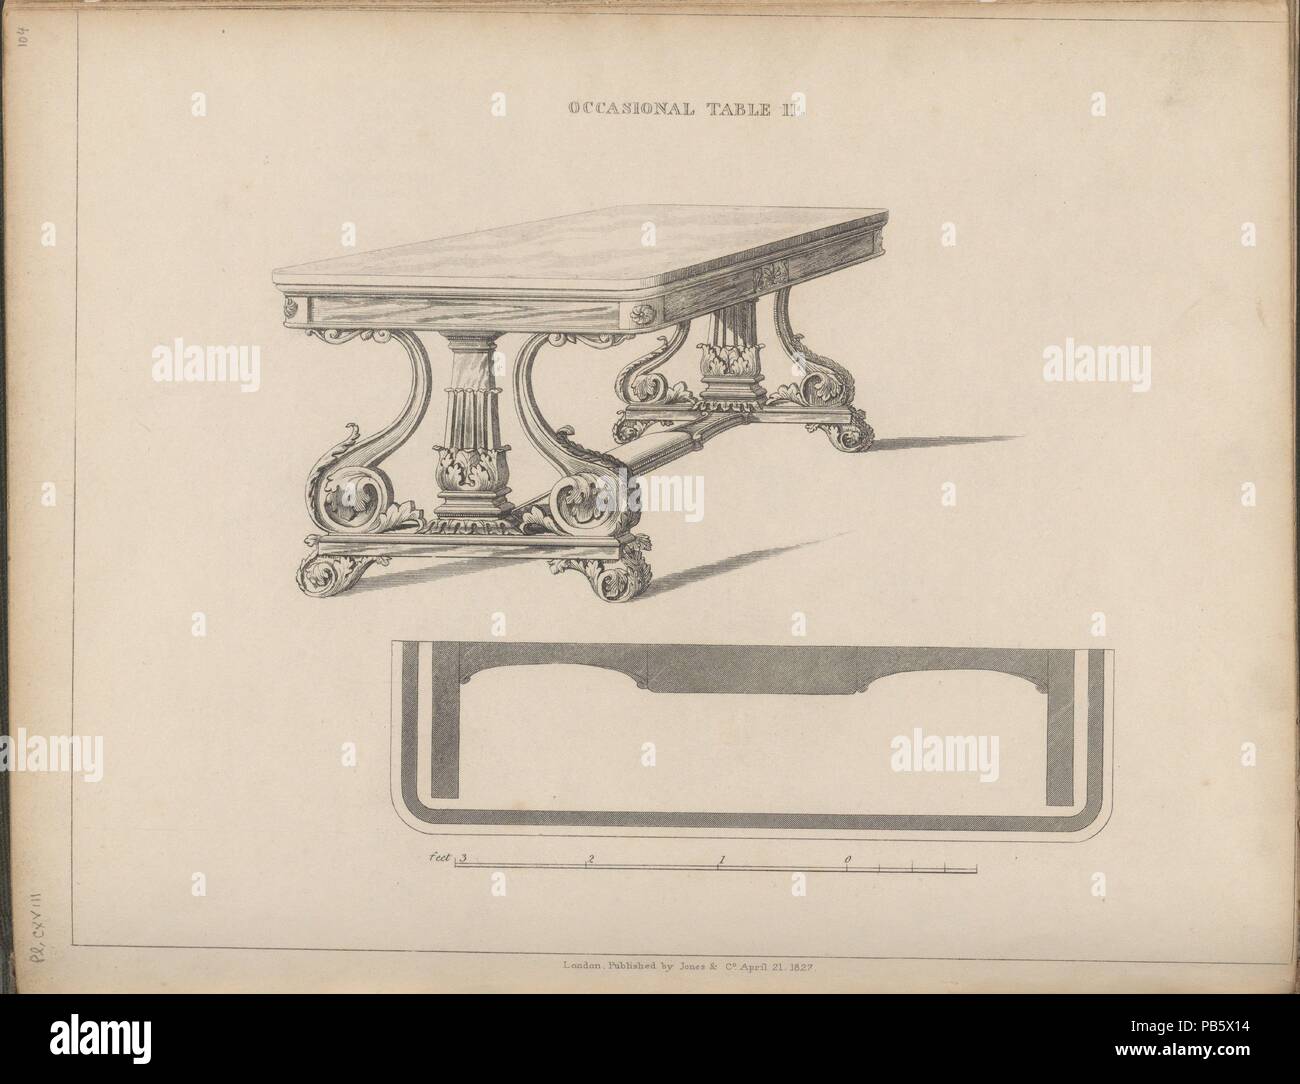 The Cabinet-Maker and Upholsterer's Guide: being a Complete Drawing Book; in which will be comprised Treatises on Geometry and Perspective, as applicable to the above branches of mechanics. Designer: Designed and written by George Smith (British, active London 1808-33). Dimensions: 10 3/8 x 8 11/16 x 1 3/4 in. (26.4 x 22.1 x 4.4 cm). Etcher: James Joshua Neele (British, 1791-1868). Printer: J. Haddon (London). Published in: London. Publisher: Jones and Company (London). Date: 1828. Museum: Metropolitan Museum of Art, New York, USA. Stock Photo